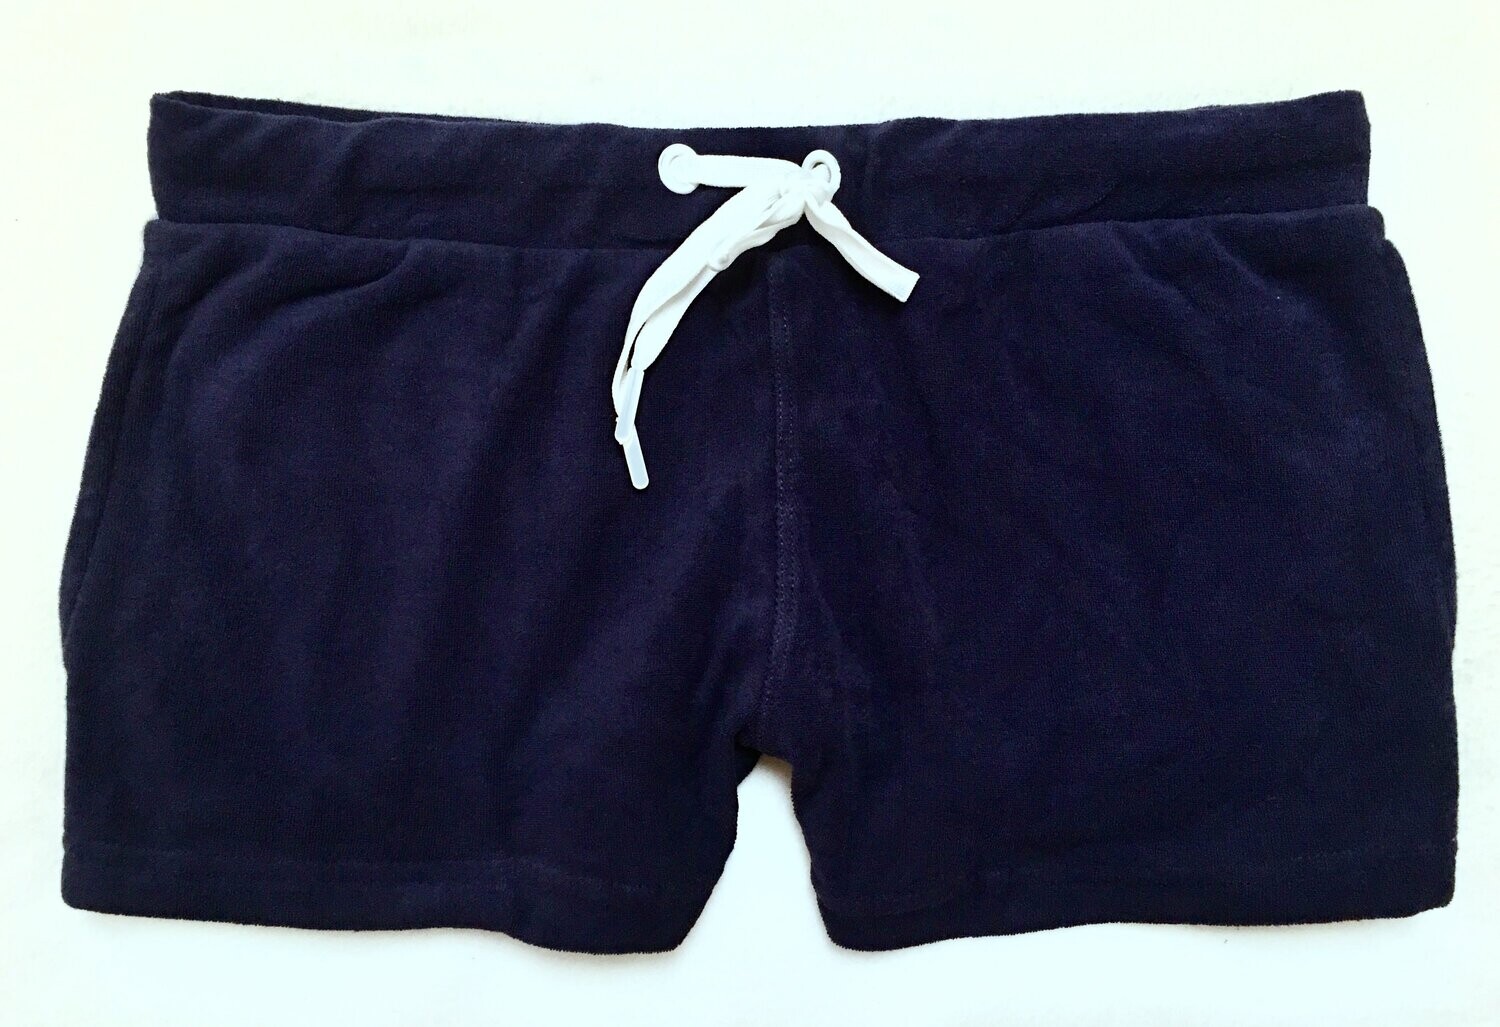 Lounge Shorts Terry Cloth - Navy Blue